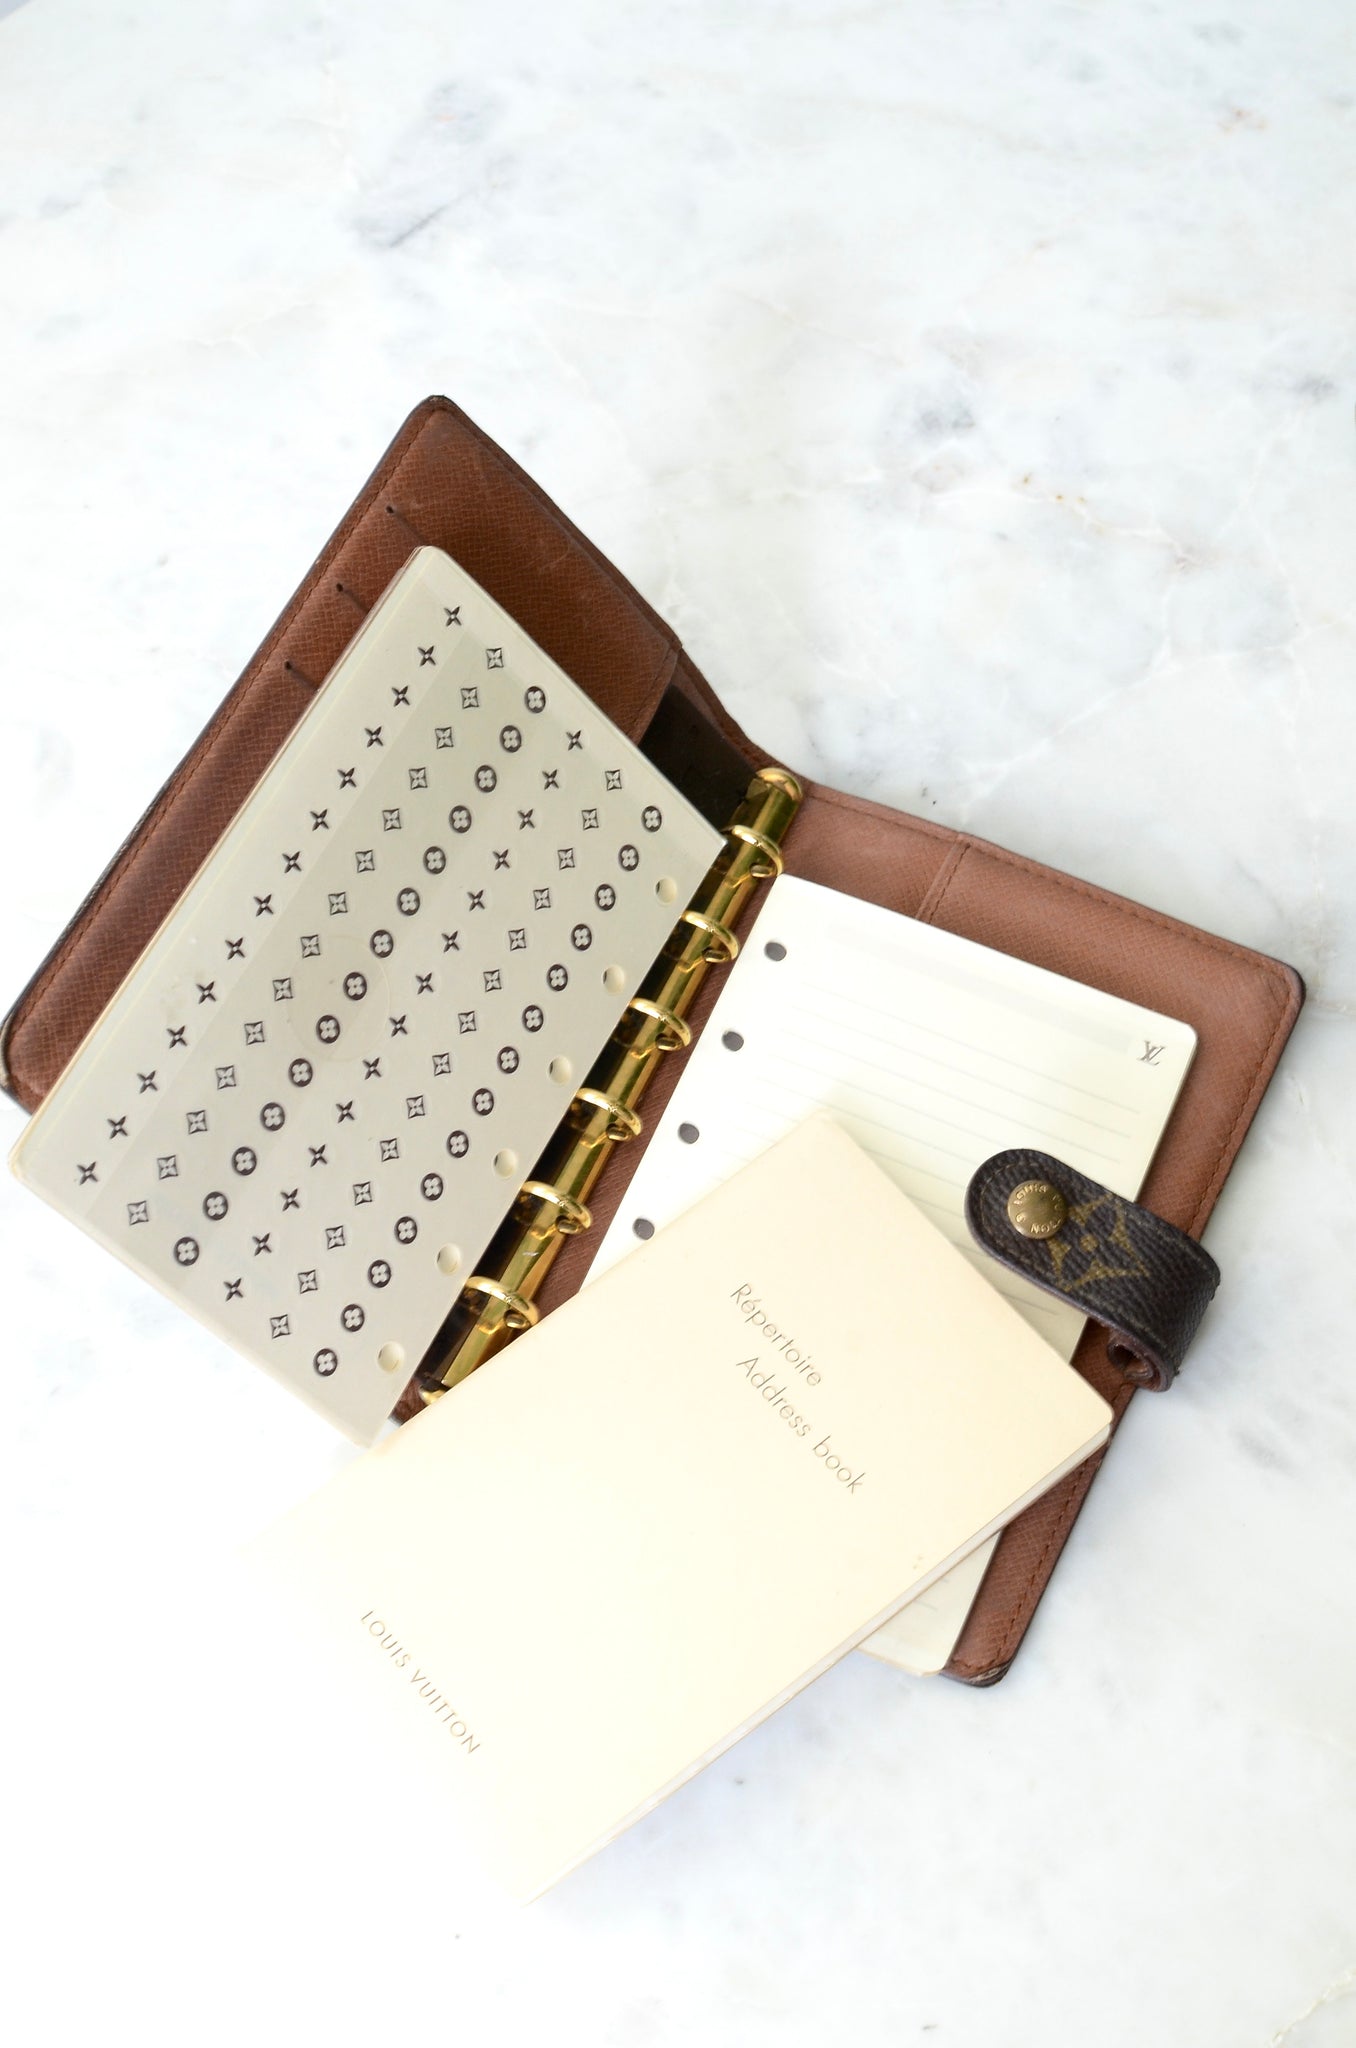 Louis Vuitton Small Agenda - 40 For Sale on 1stDibs